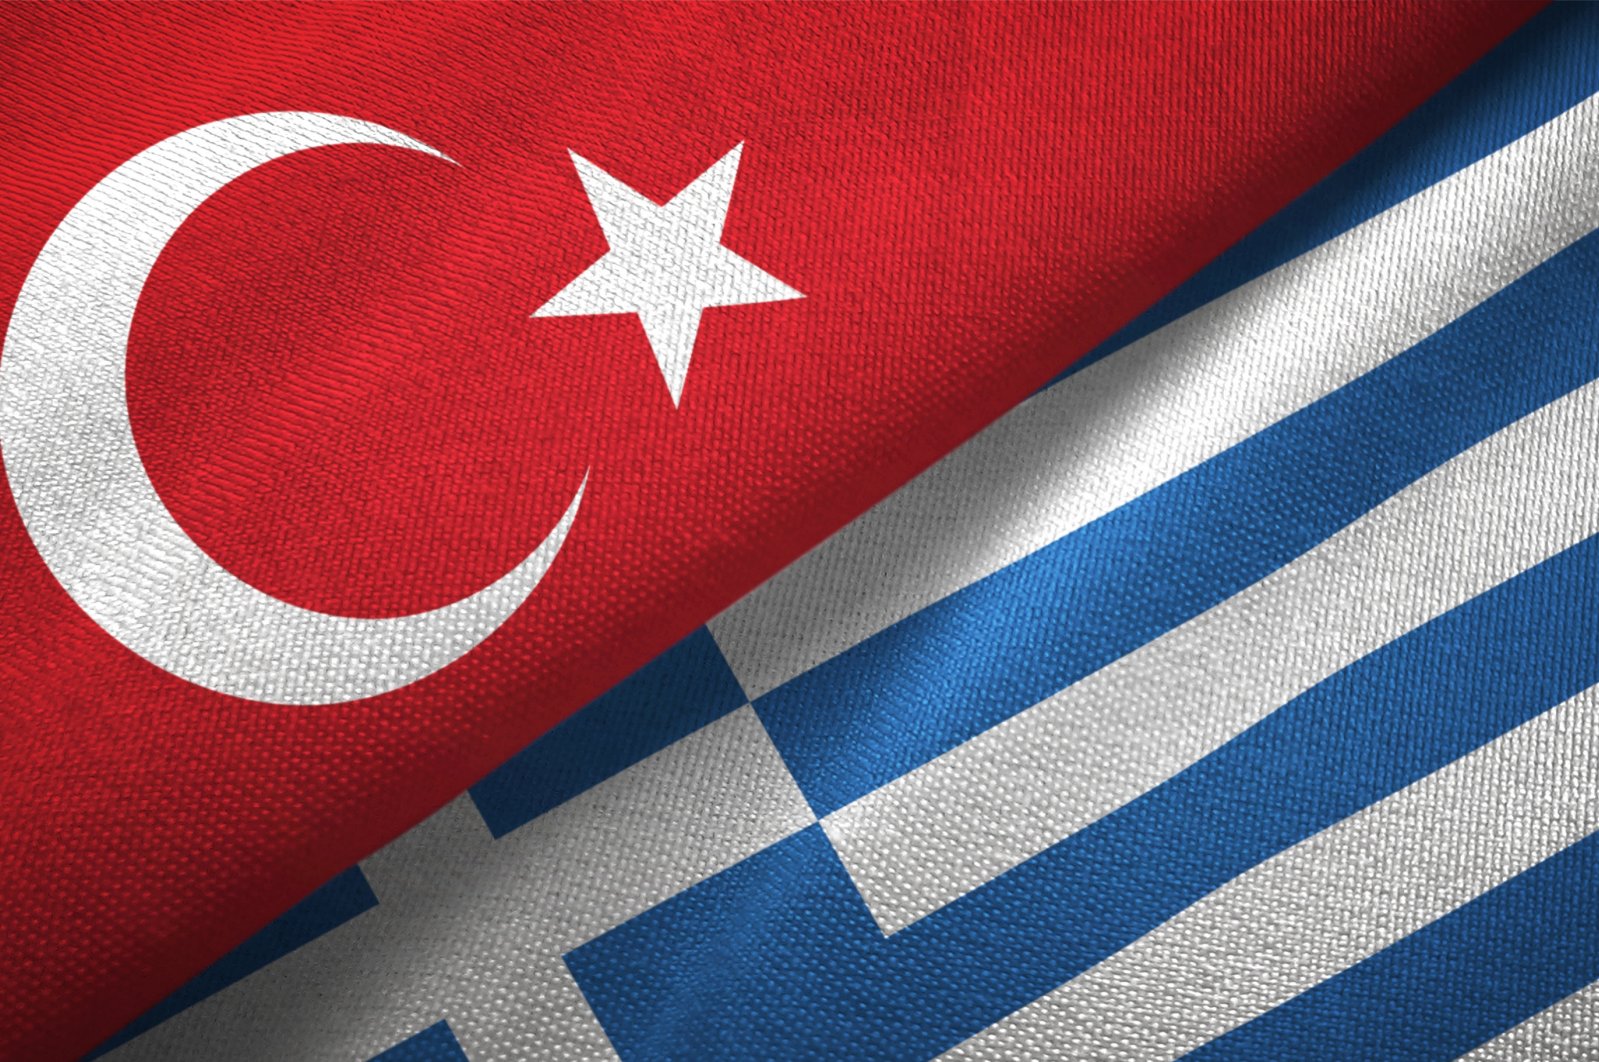 Turkish and Greek flags are seen in a textile cloth fabric texture, Sept. 6, 2020. (Getty Images)